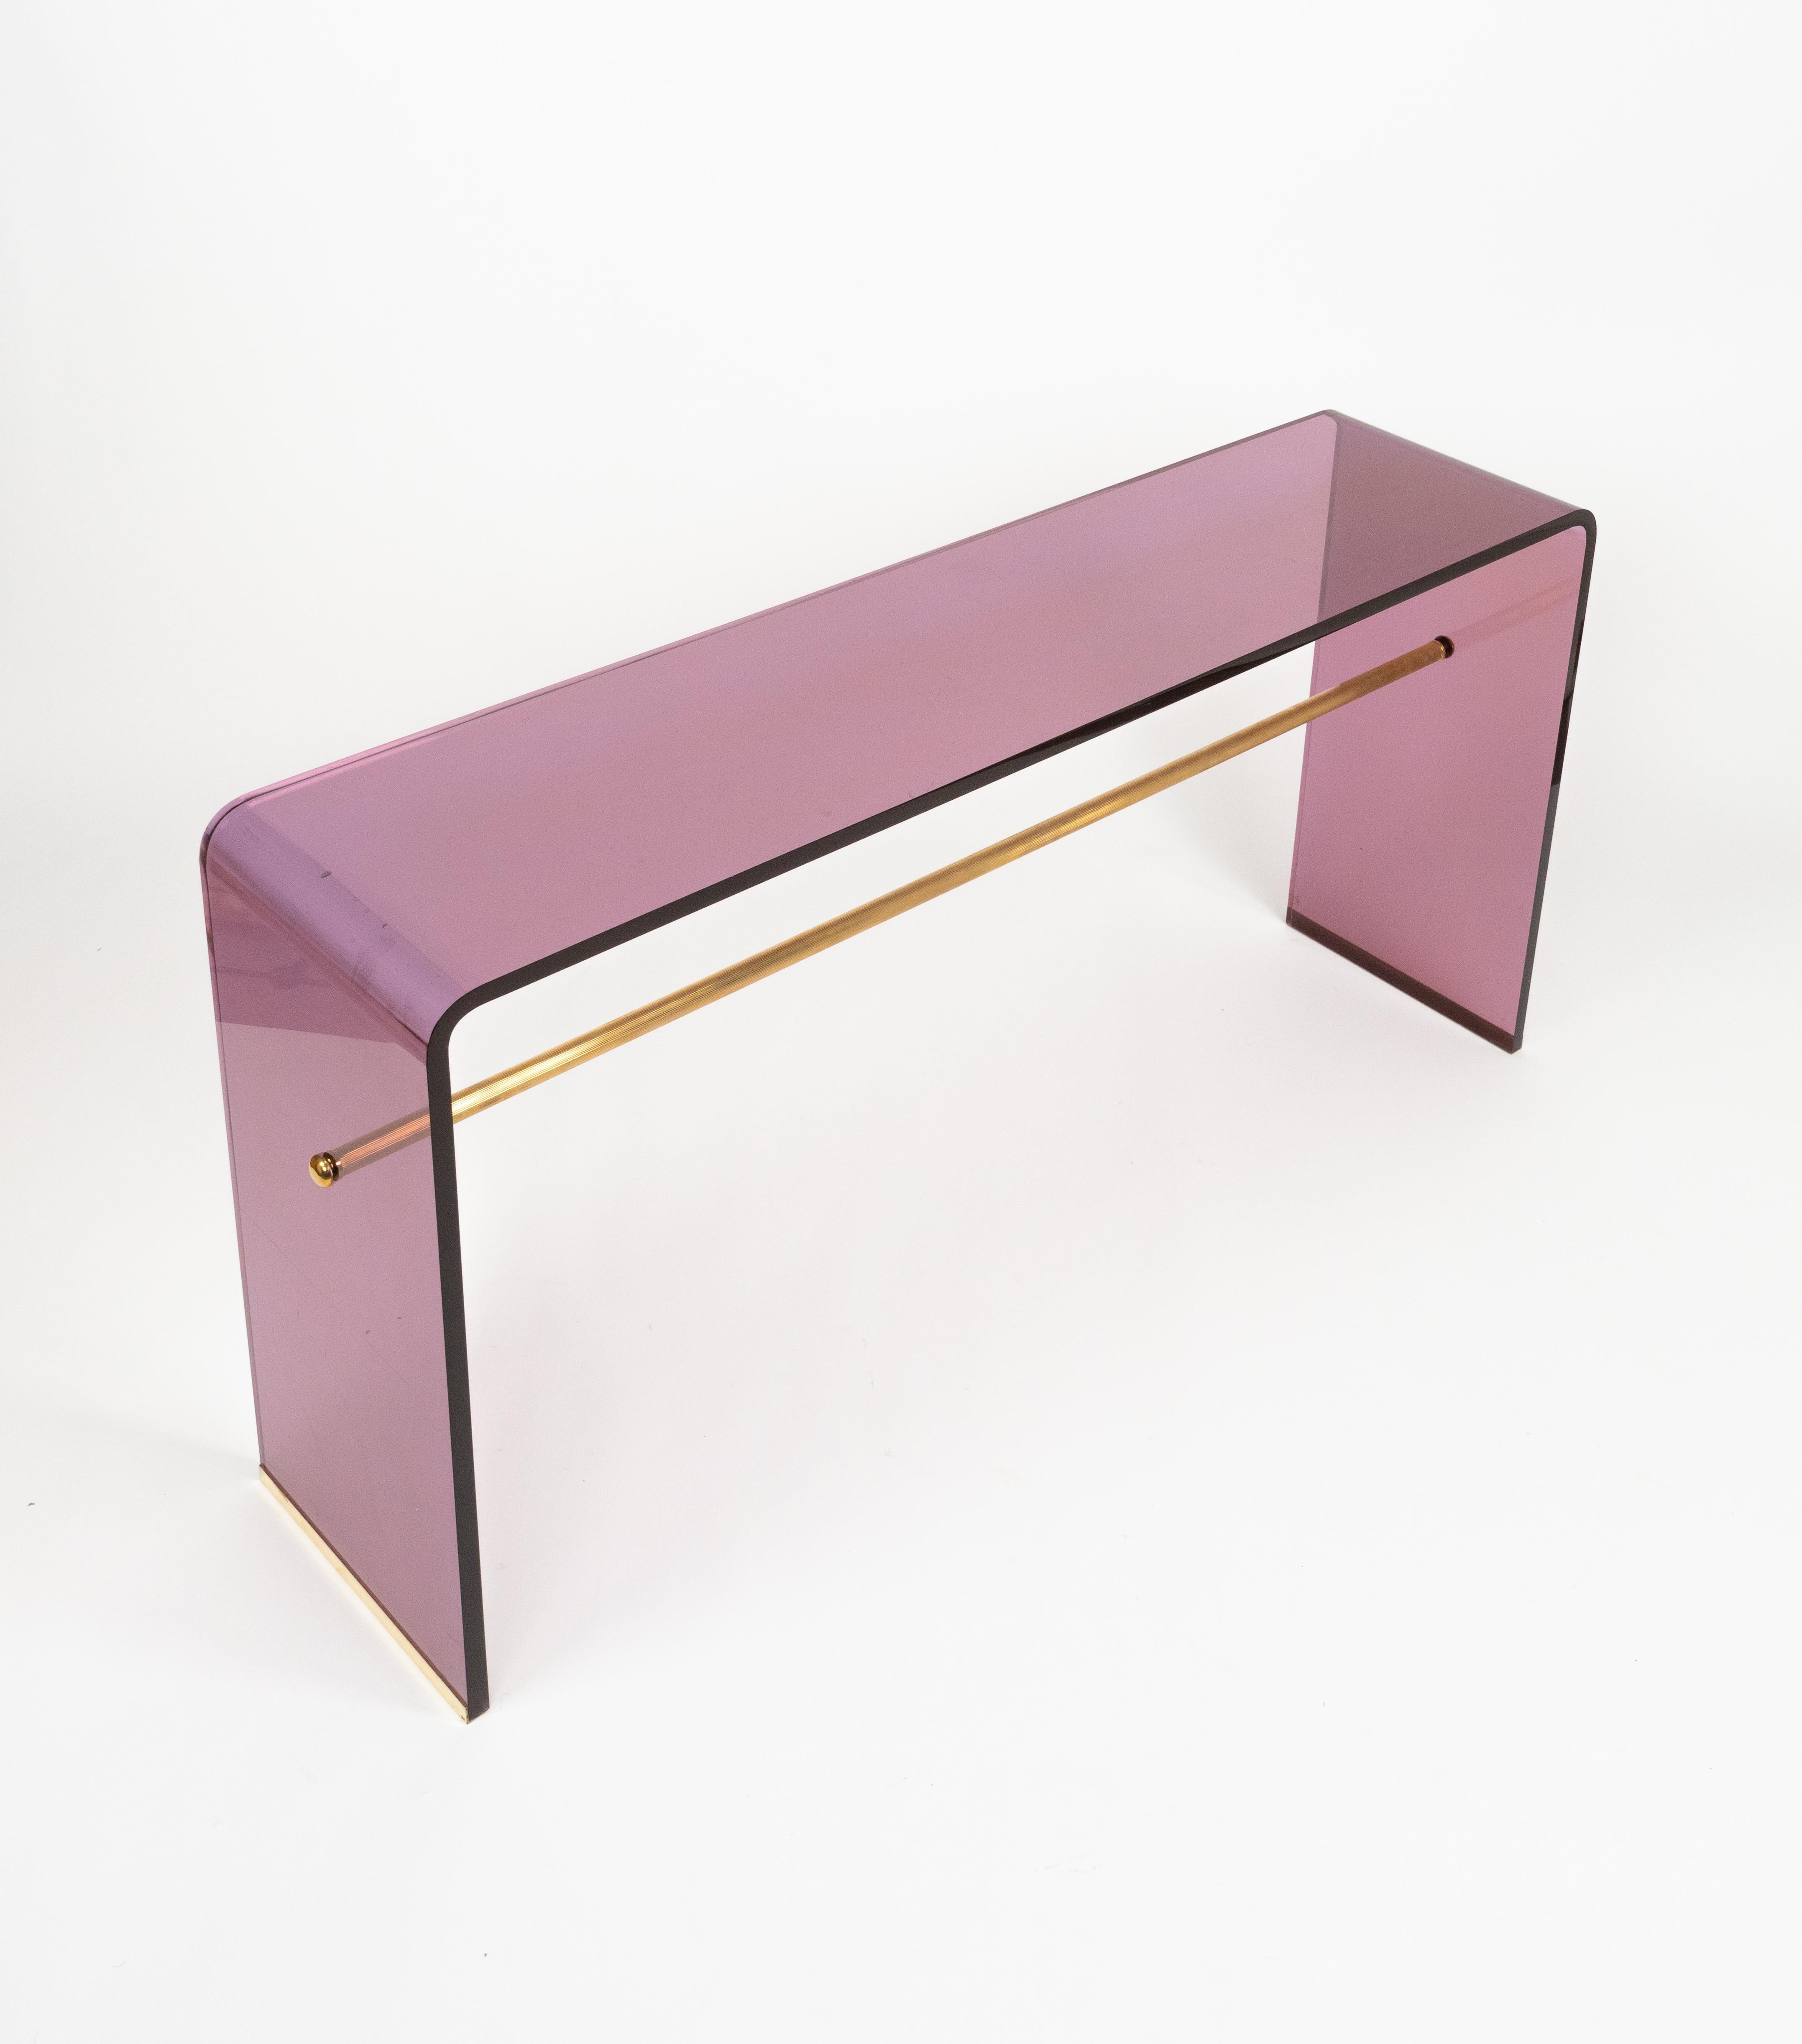 Midcentury amazing console in purple lucite and brass in the style of Alessandro Albrizzi.

Made in Italy in the 1970s.